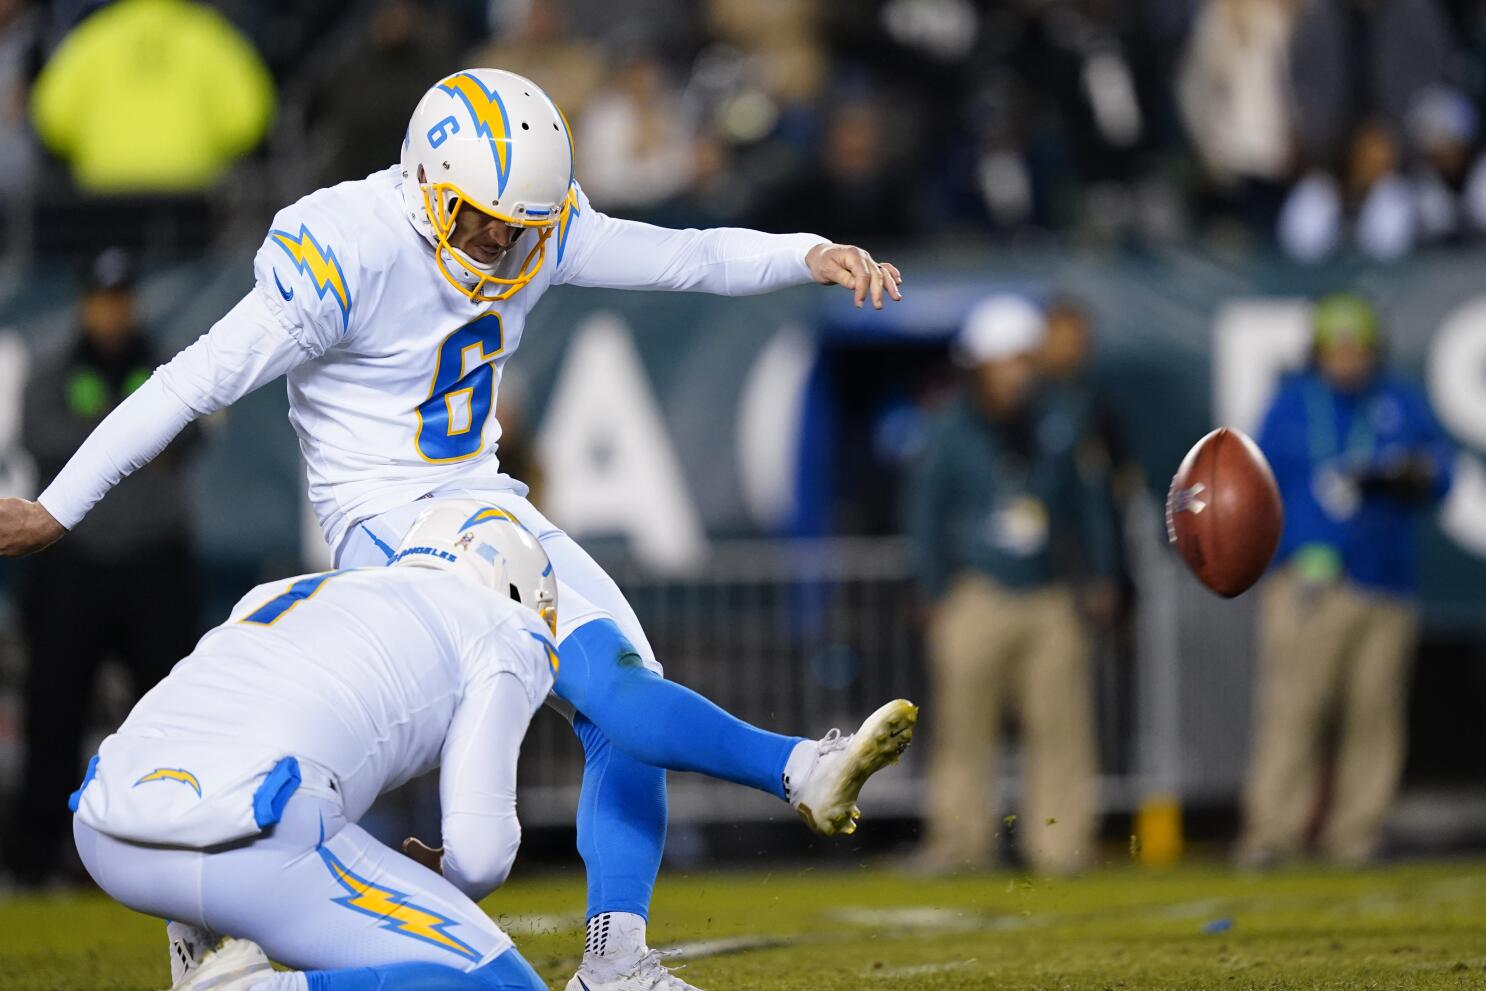 Chargers are sending placekicker Dustin Hopkins to the Browns